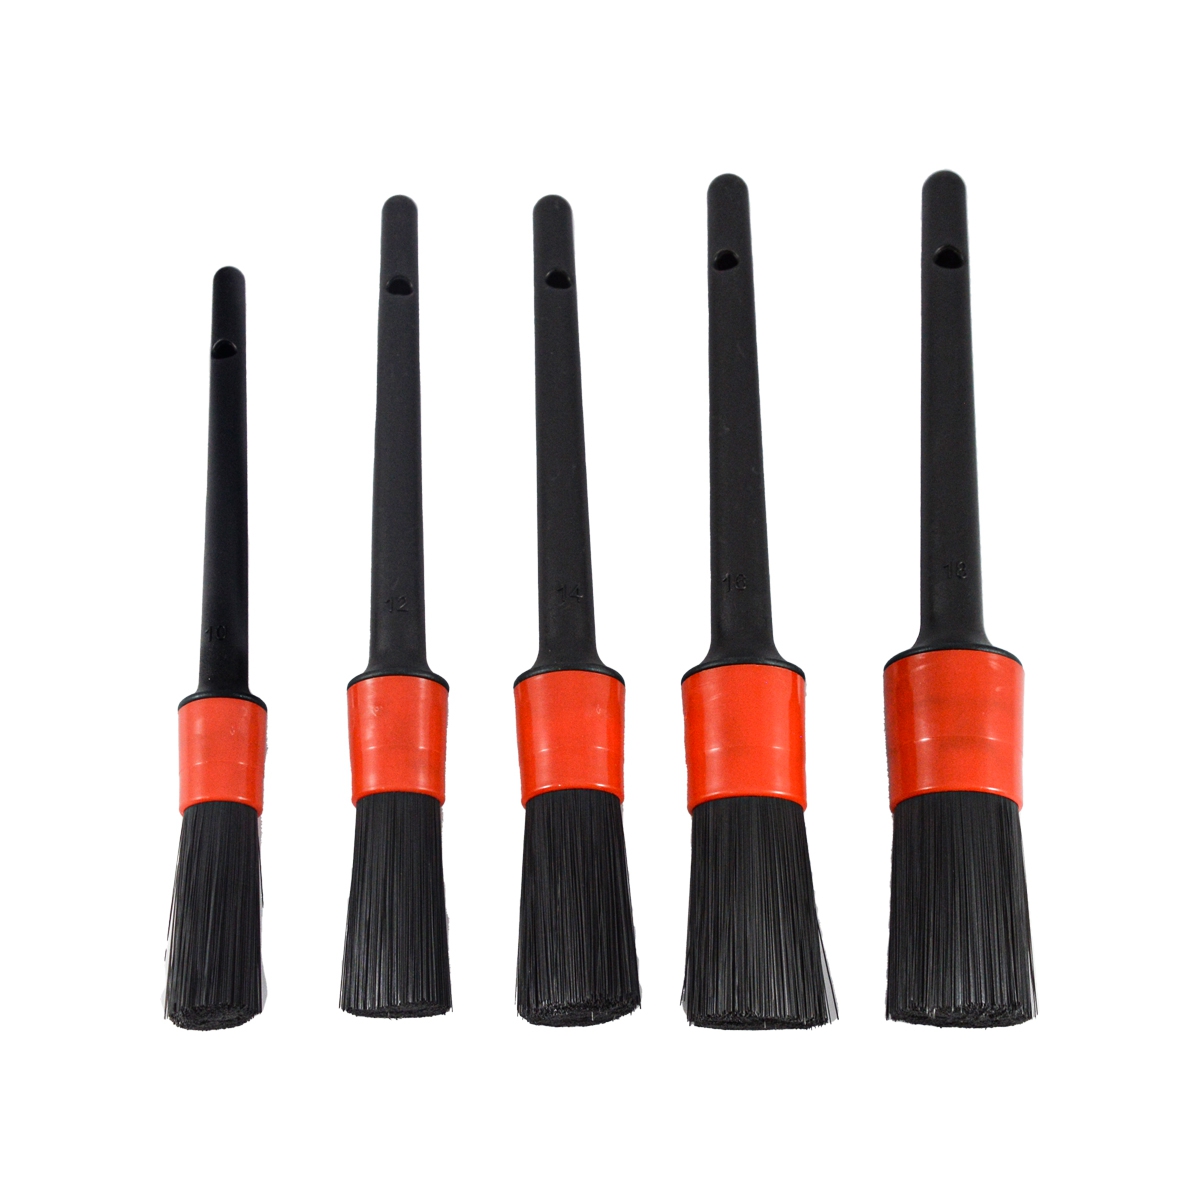 Detailed%20Cleaning%20Brush%20Set%205%20Pieces